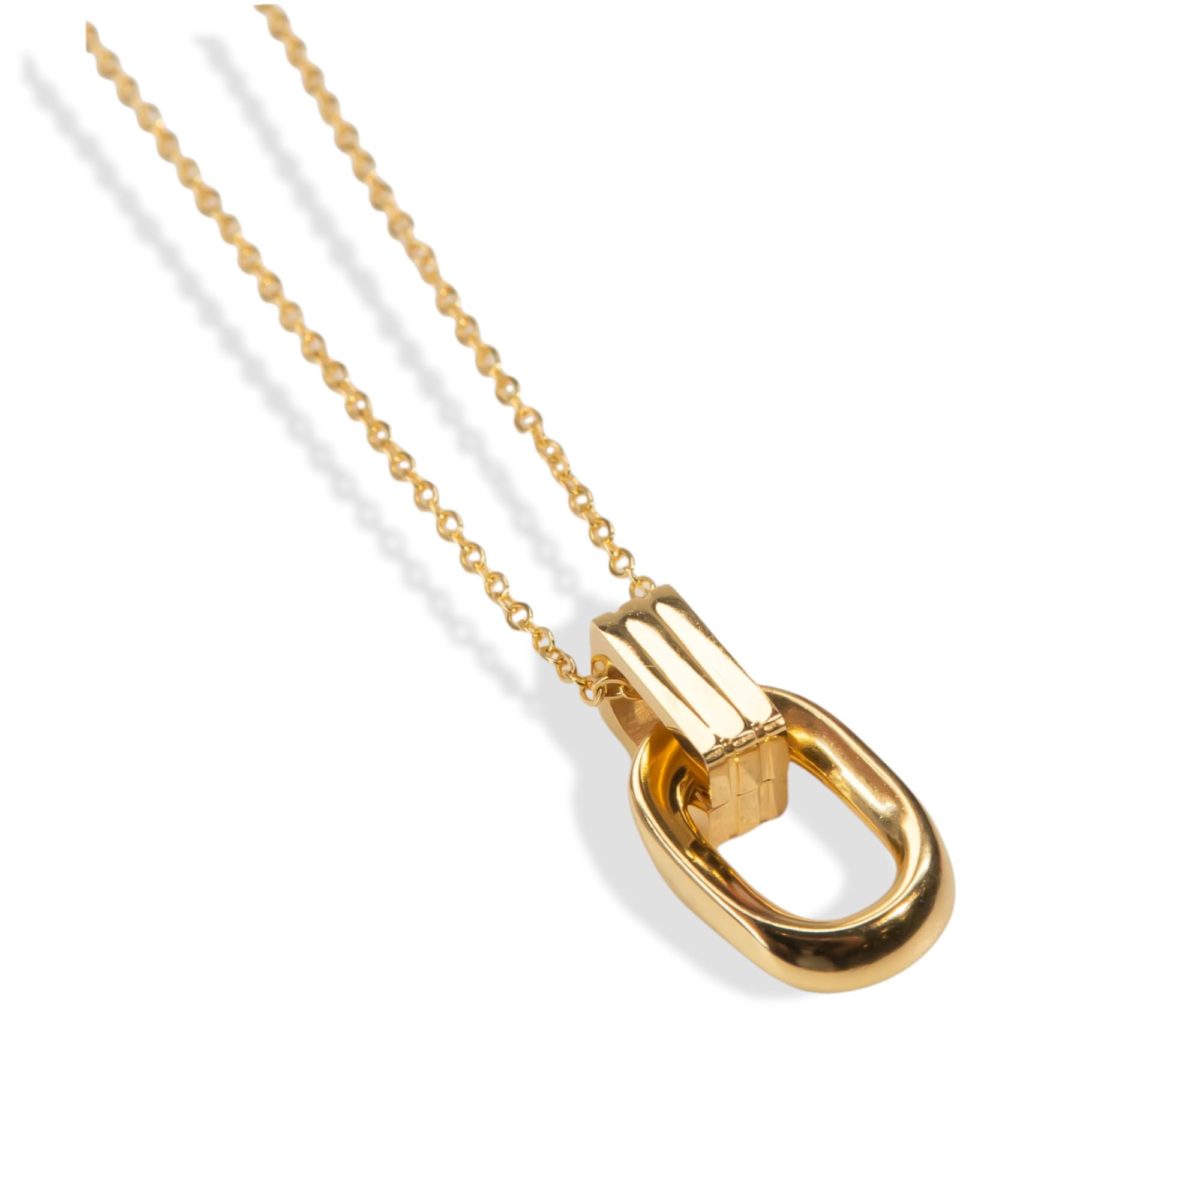 https://m.clubbella.co/product/harleigh-18-k-gold-plated/ harleigh 8